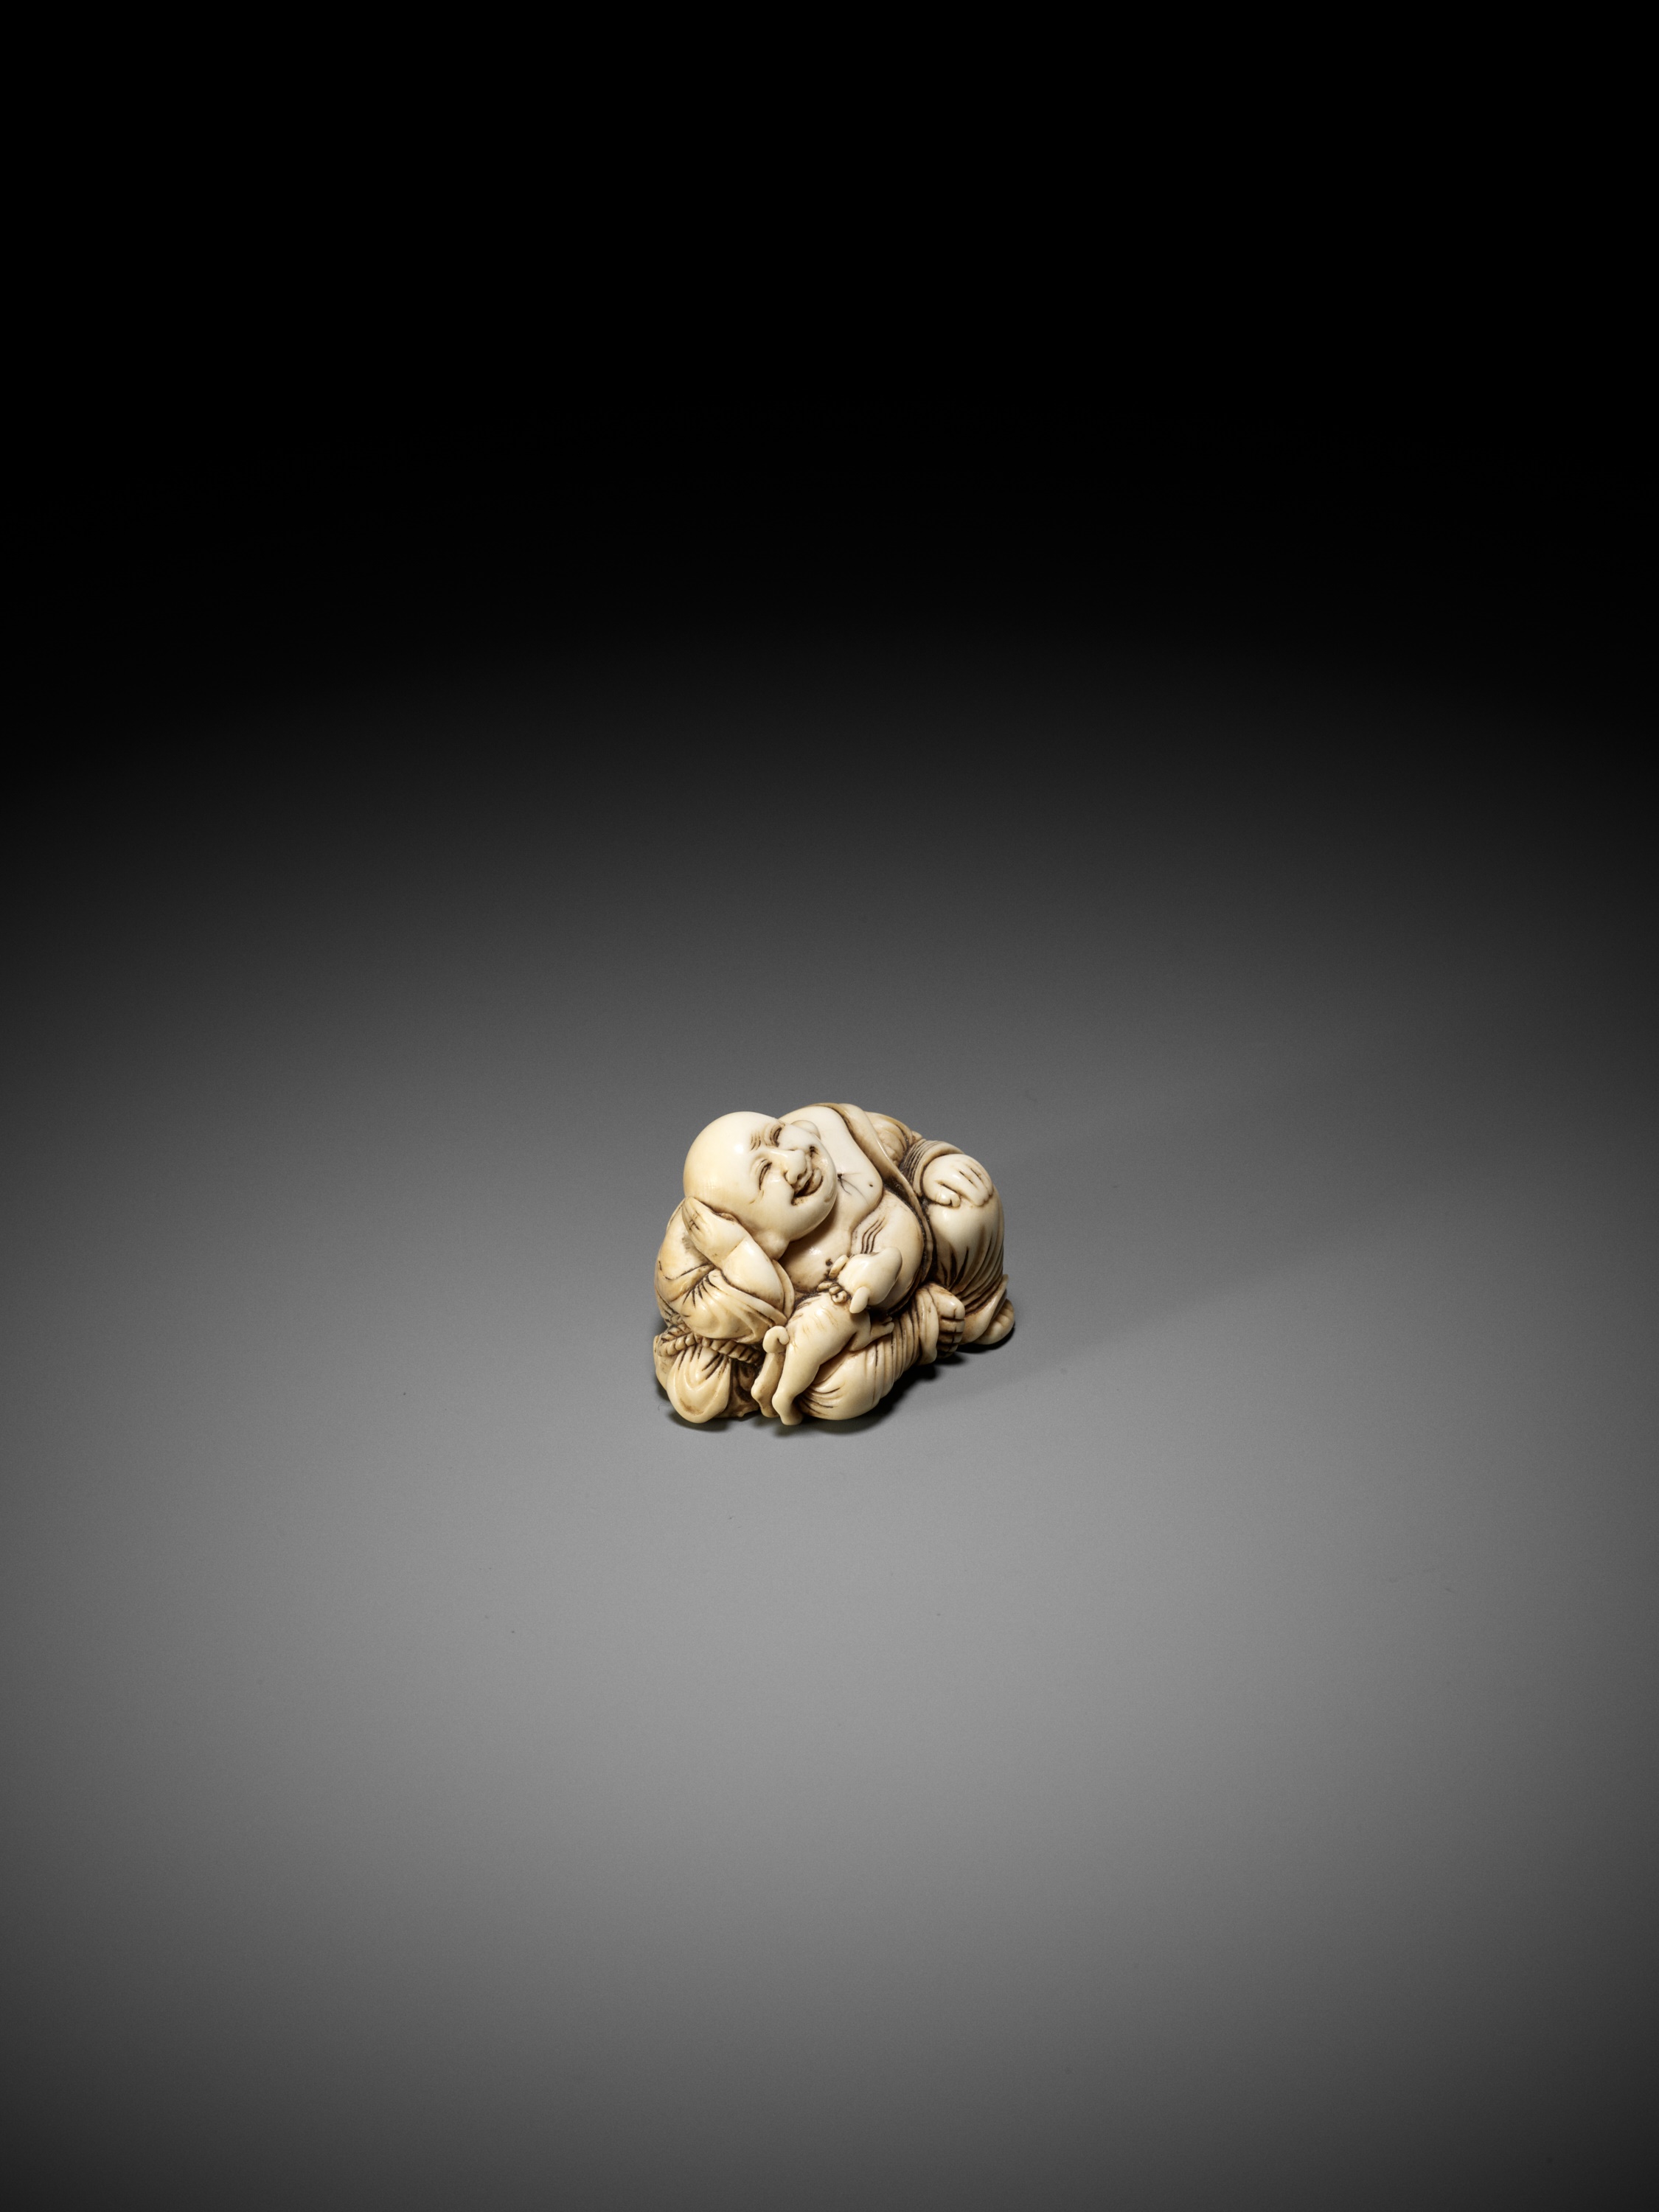 A CHARMING IVORY NETSUKE OF HOTEI WITH PUPPY - Image 8 of 12